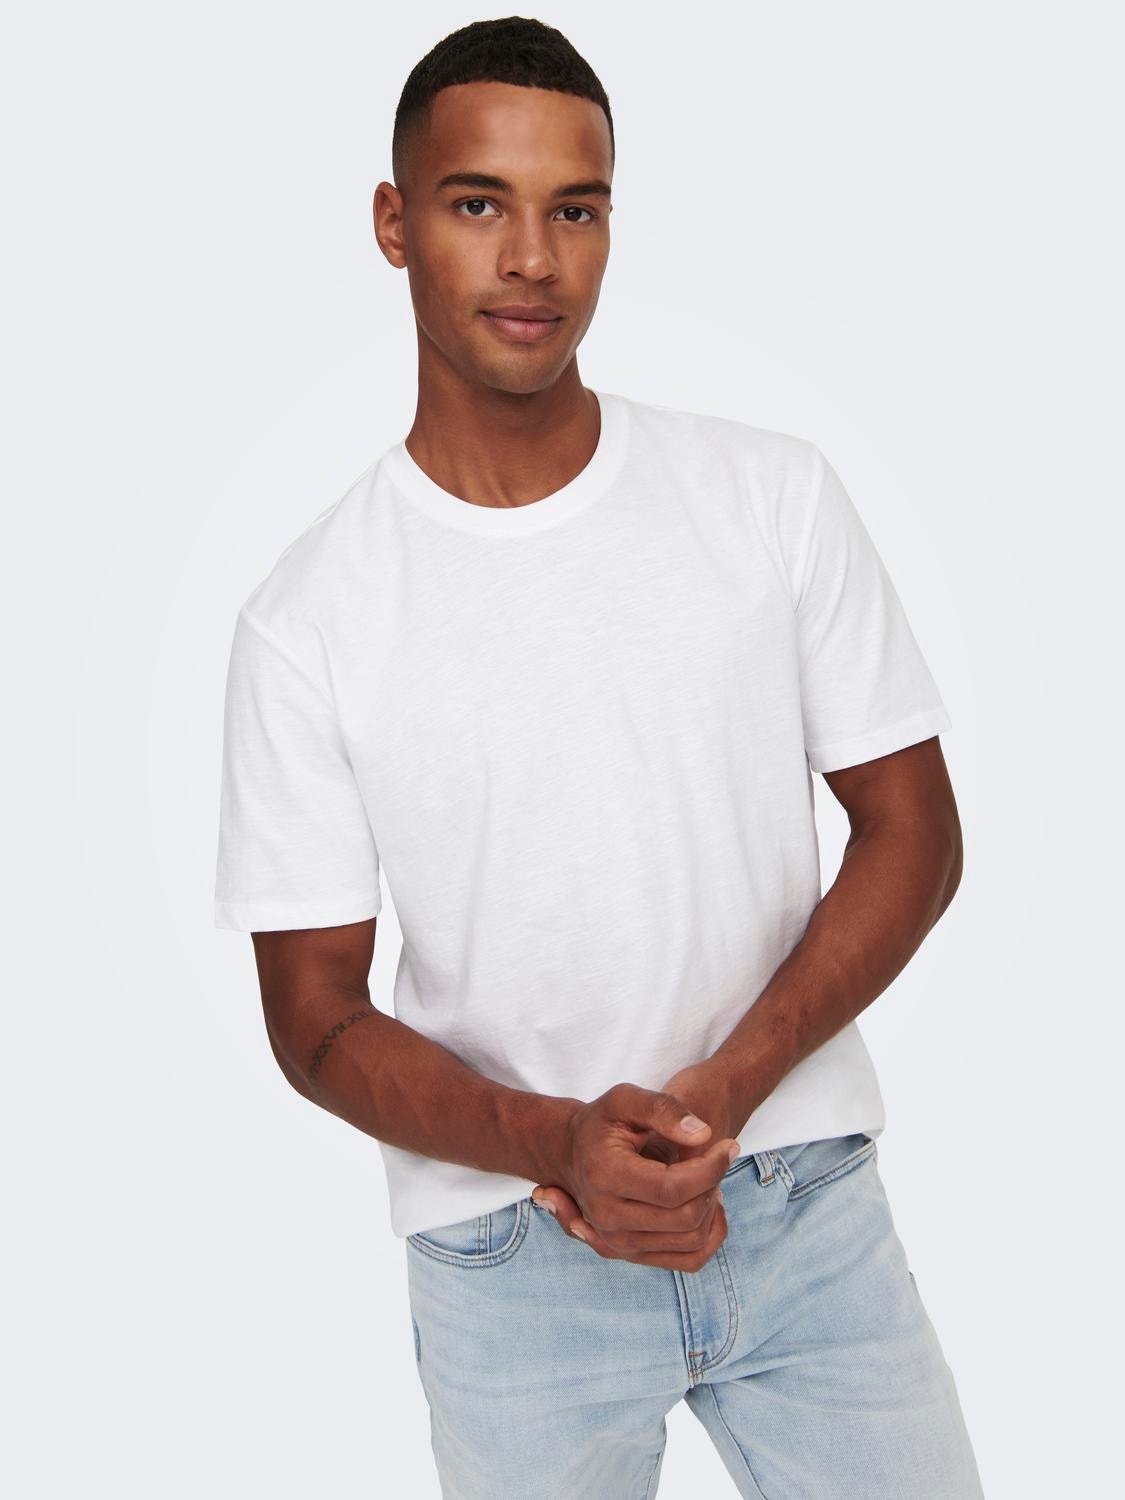 ONLY & SONS o-neck t-shirt -White - 22020074